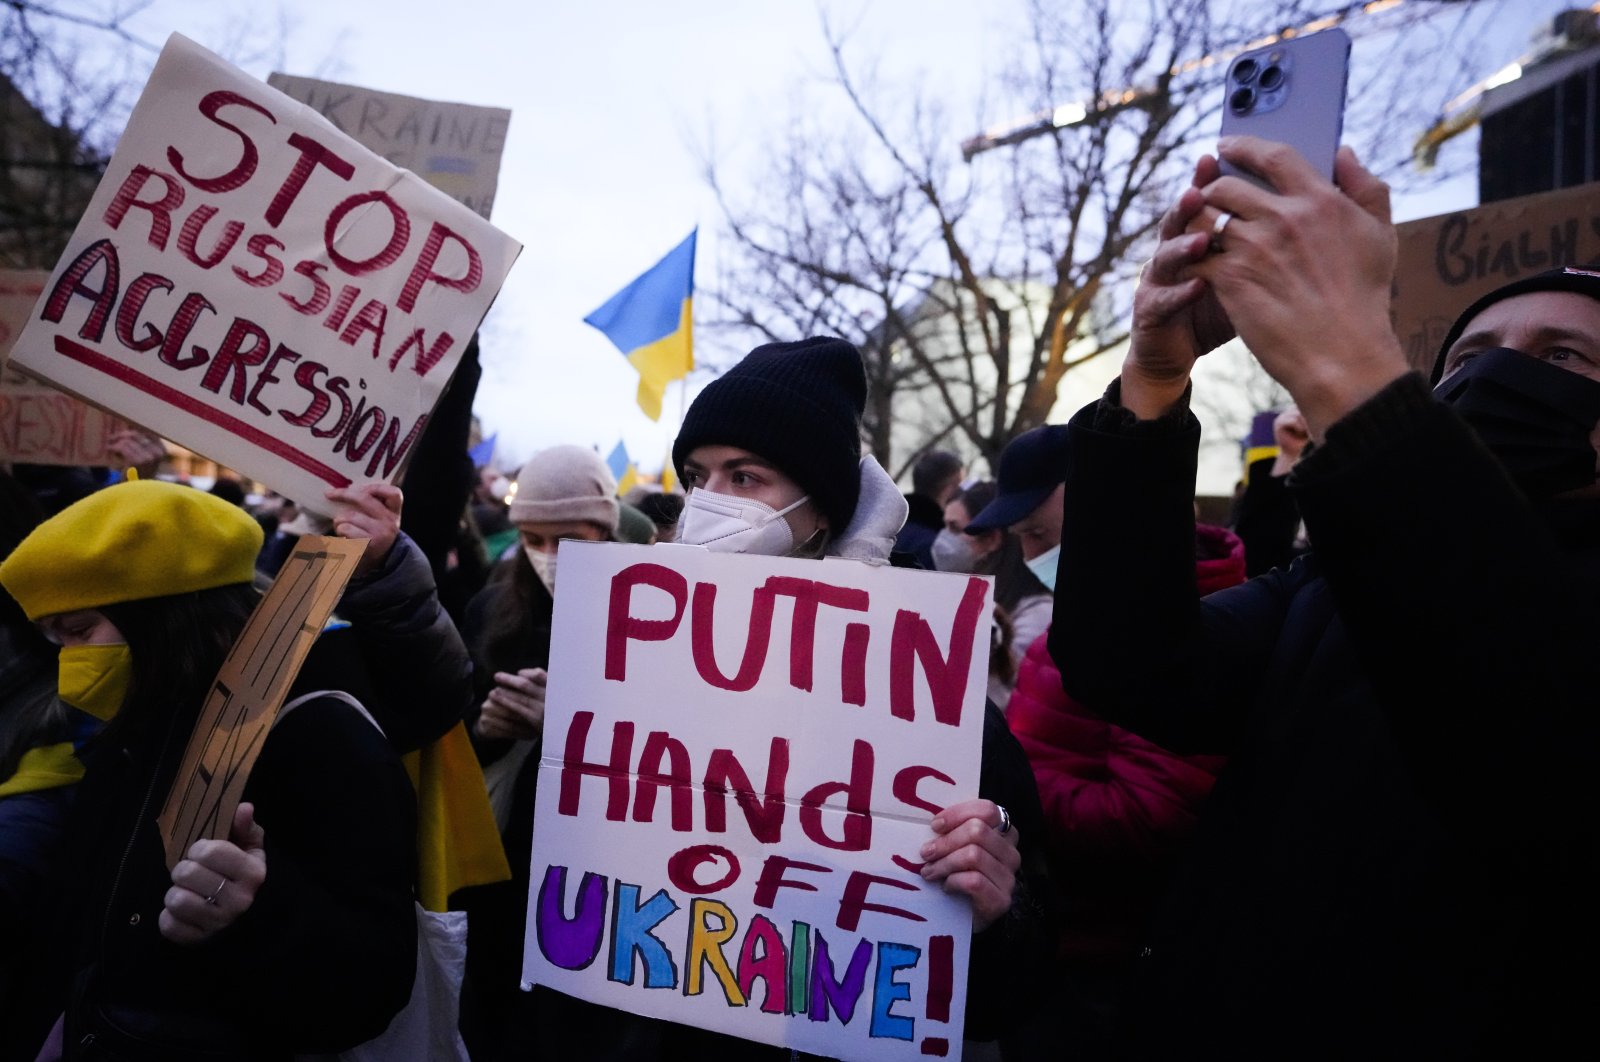 Women show posters in support of Ukraine as they attend a demonstration along the street near the Russian embassy to protest against the escalation of the tension between Russia and Ukraine in Berlin, Germany, Feb. 22, 2022. (AP Photo)